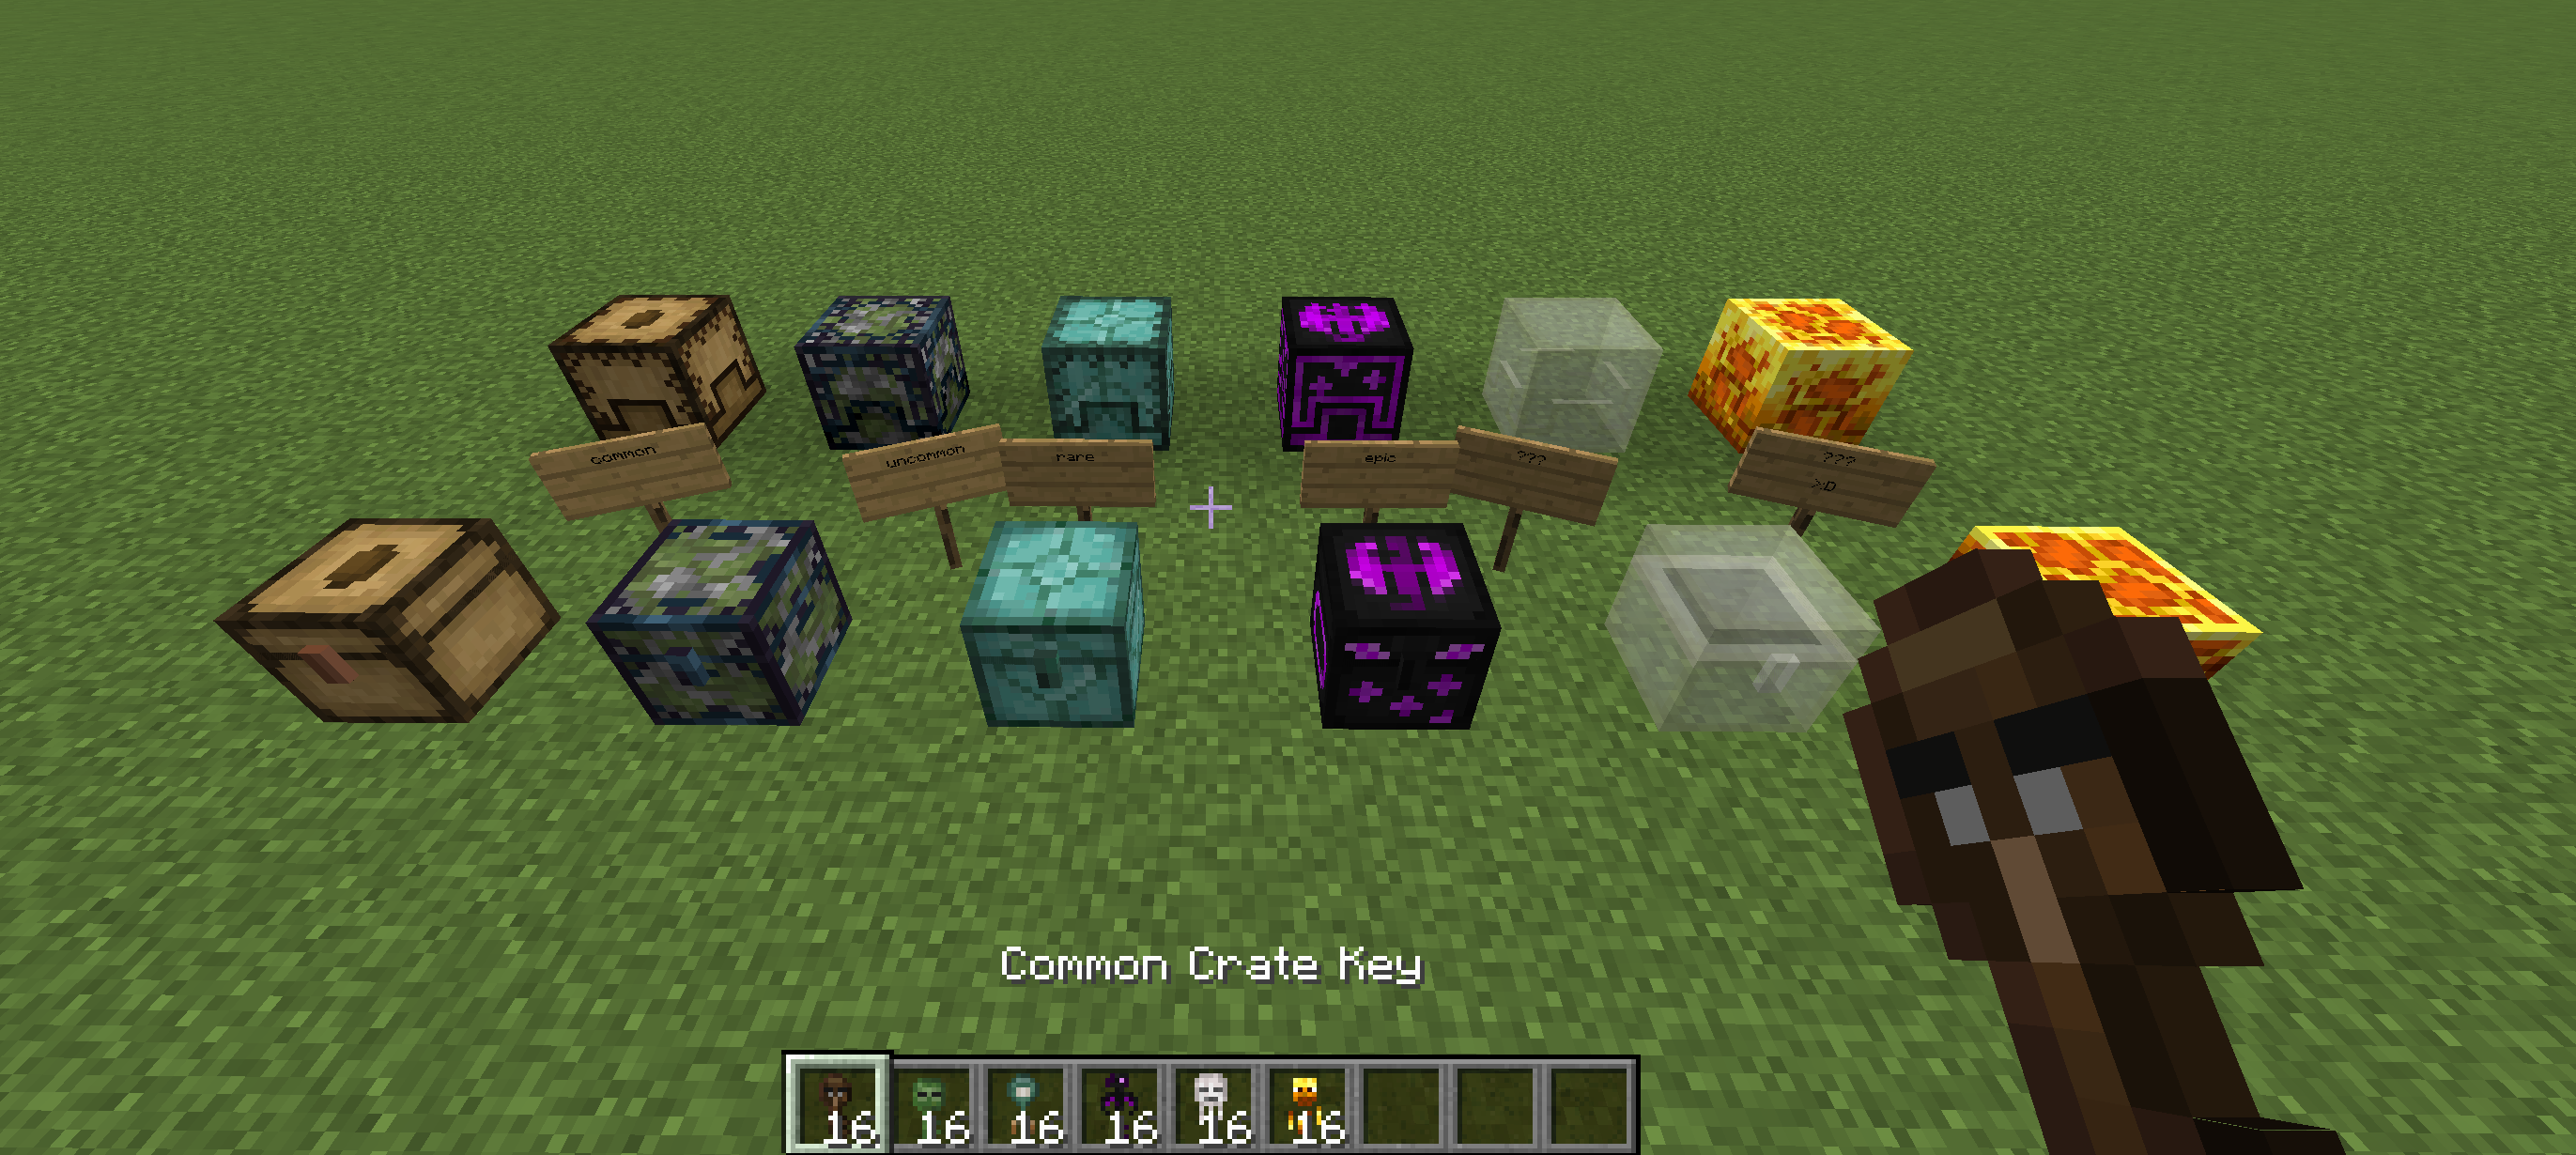 All the different loot crates, shulker crates and keys